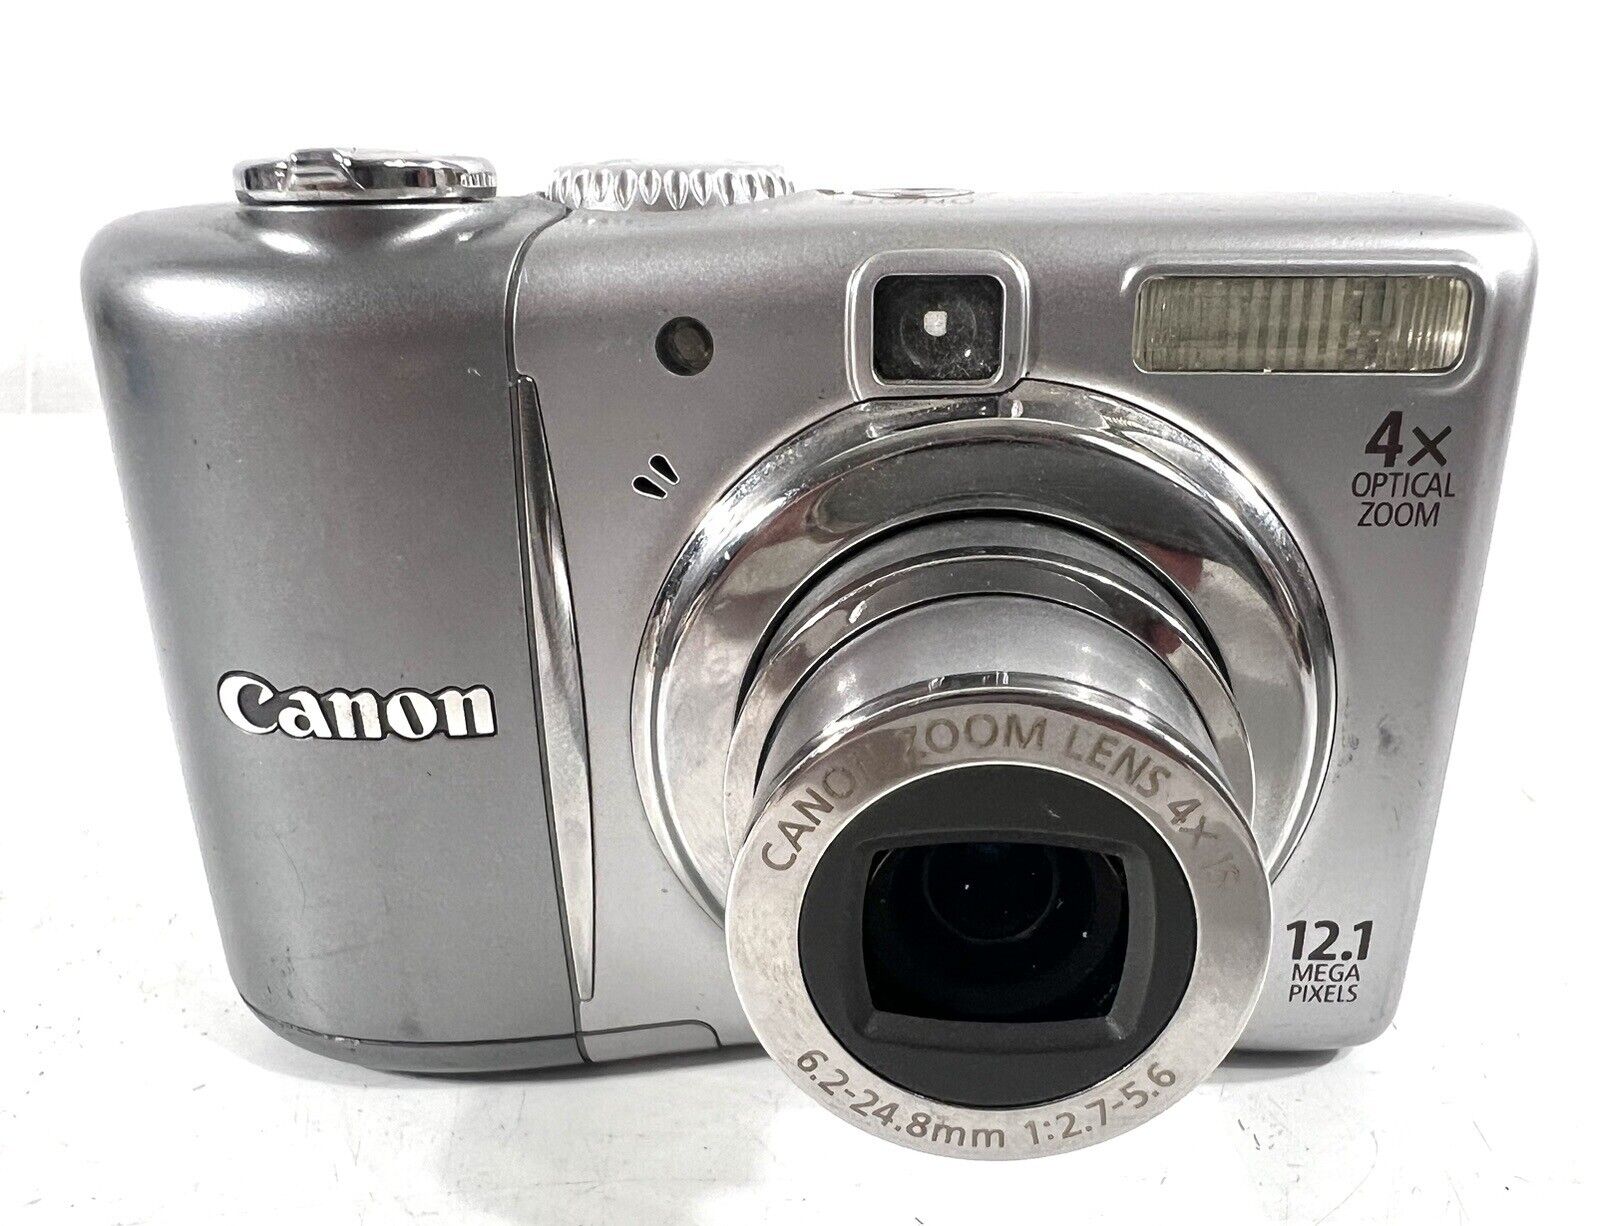 Canon A1100 IS